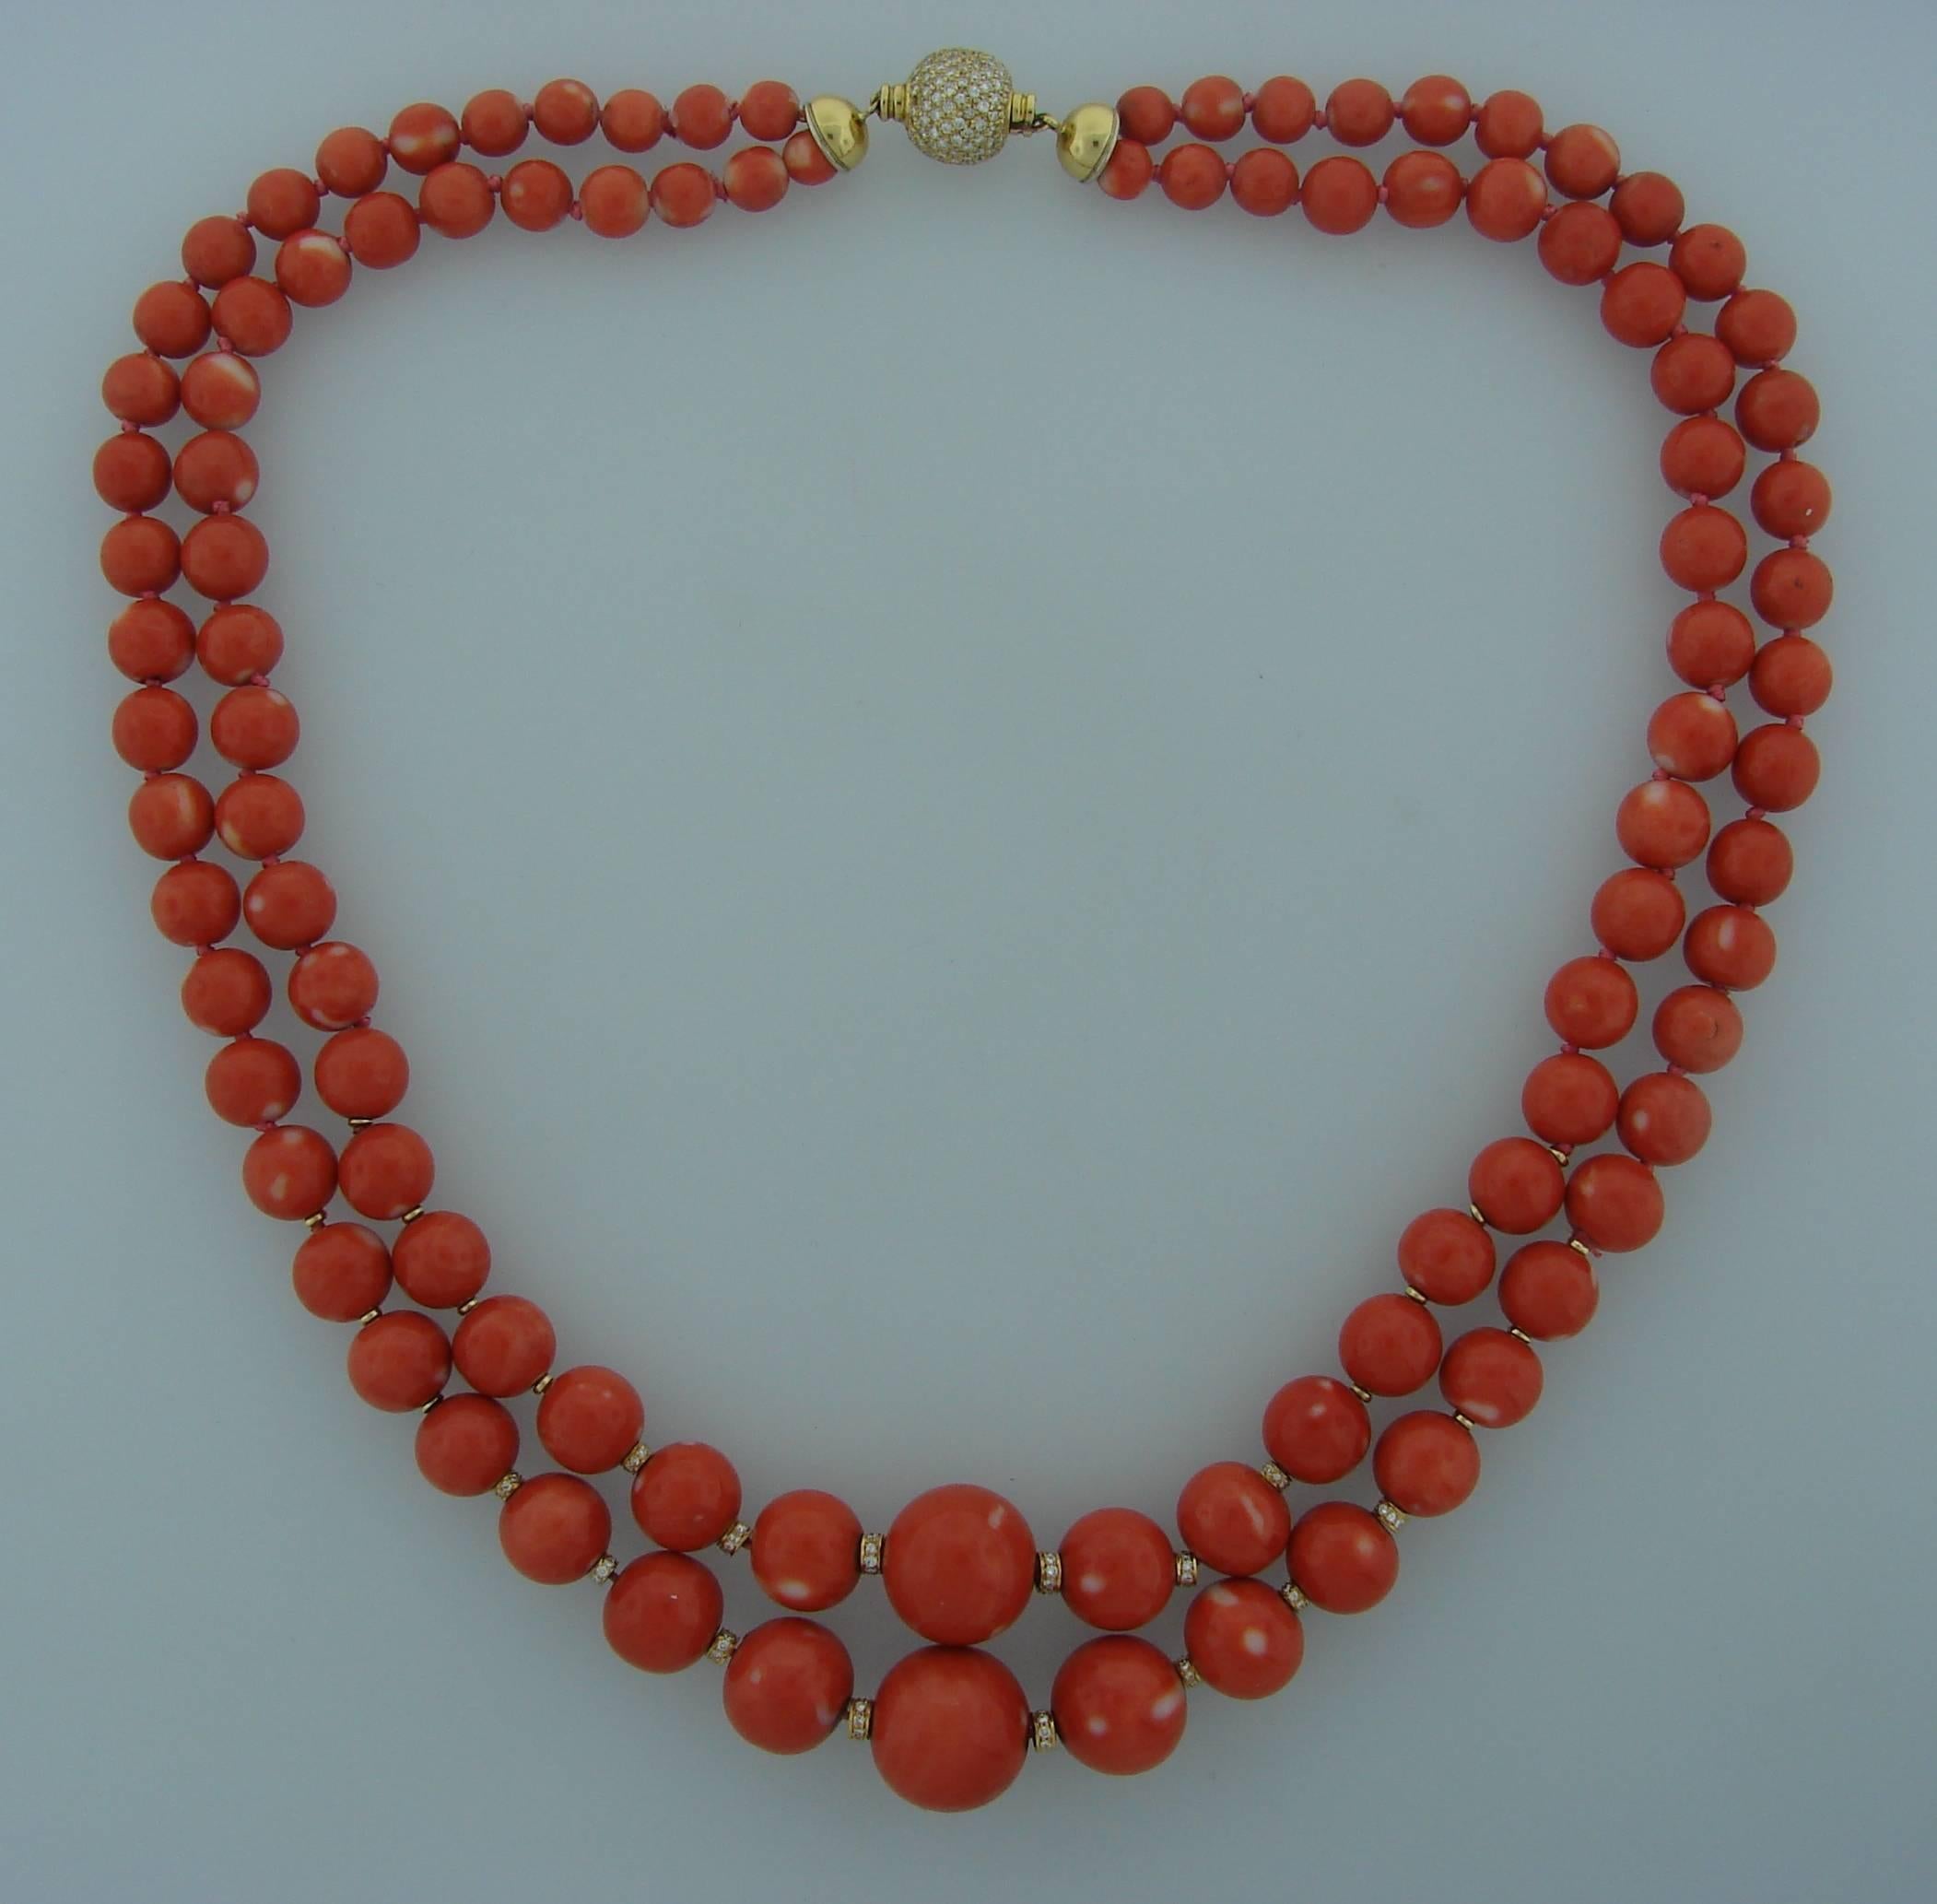 Beautiful two-strand Mediterranean coral bead necklace finished with a round diamond & 18k (stamped) yellow gold clasp and rondelles. The necklace made by Salavetti in Italy in the 1970's.The coral beads are graduating from 18 mm in diameter in the